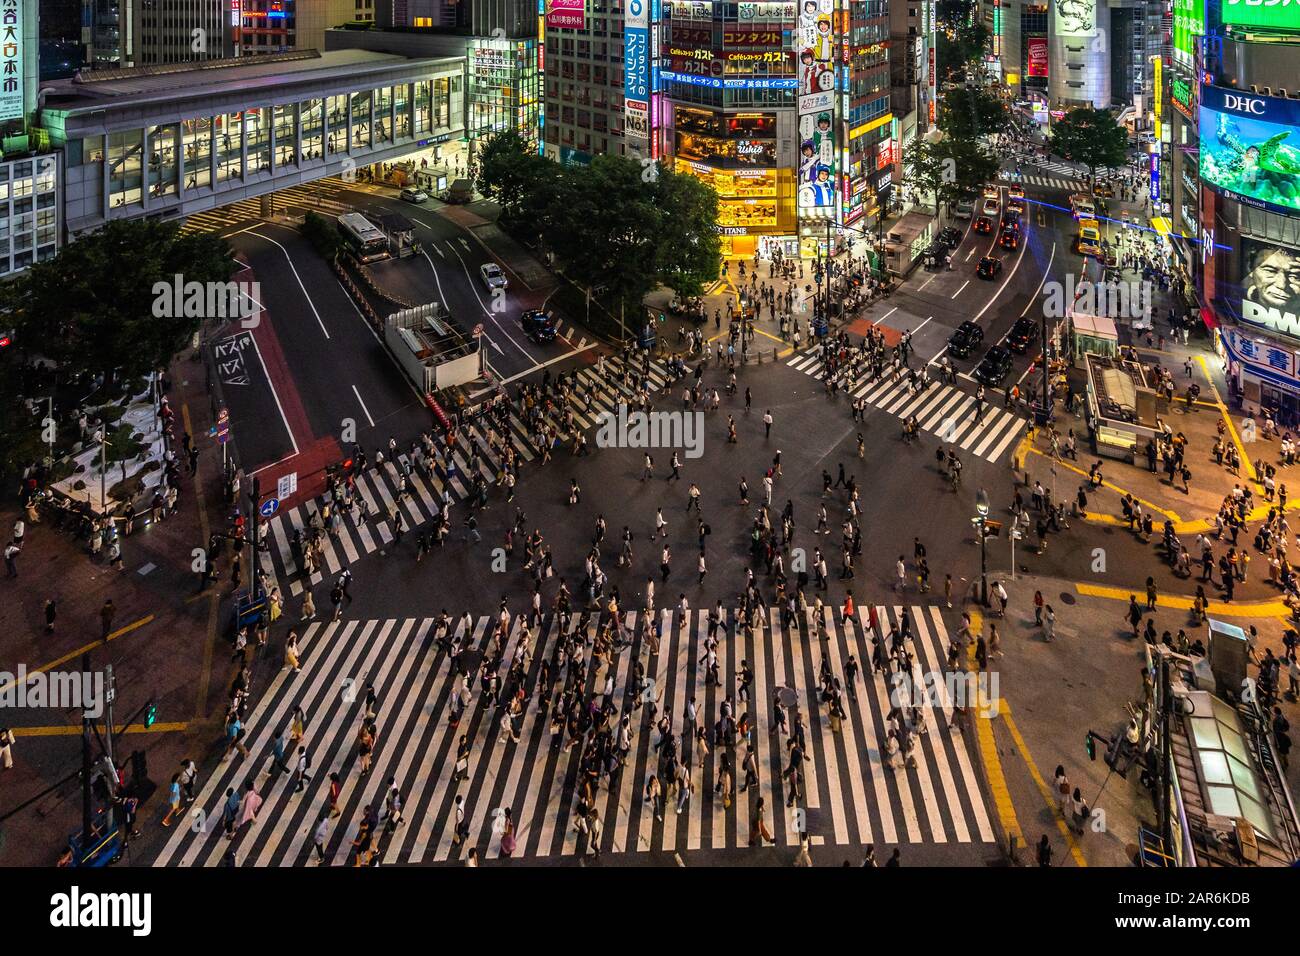 Night aerial view of Shibuya crossing, one of the most crowded crosswalks in the world. Tokyo, Japan, August 2019 Stock Photo